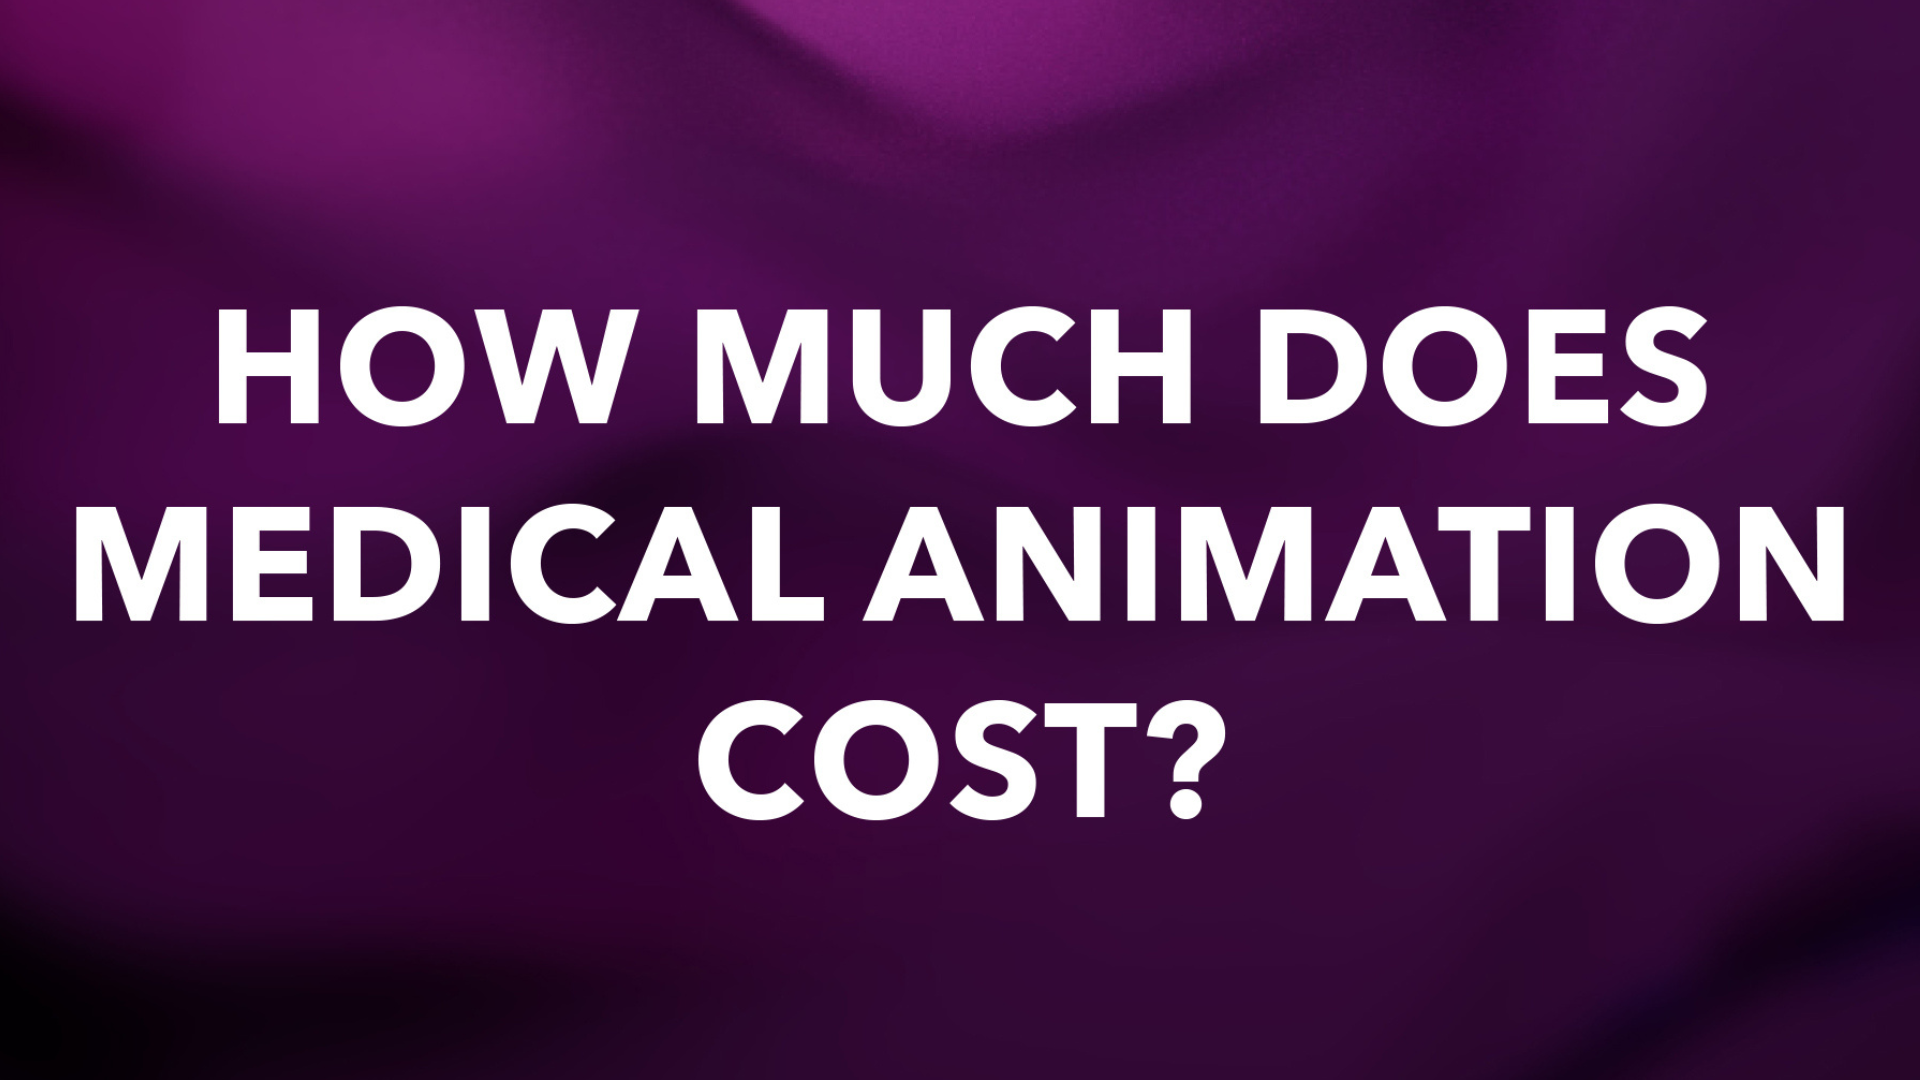 How much does medical animation cost?